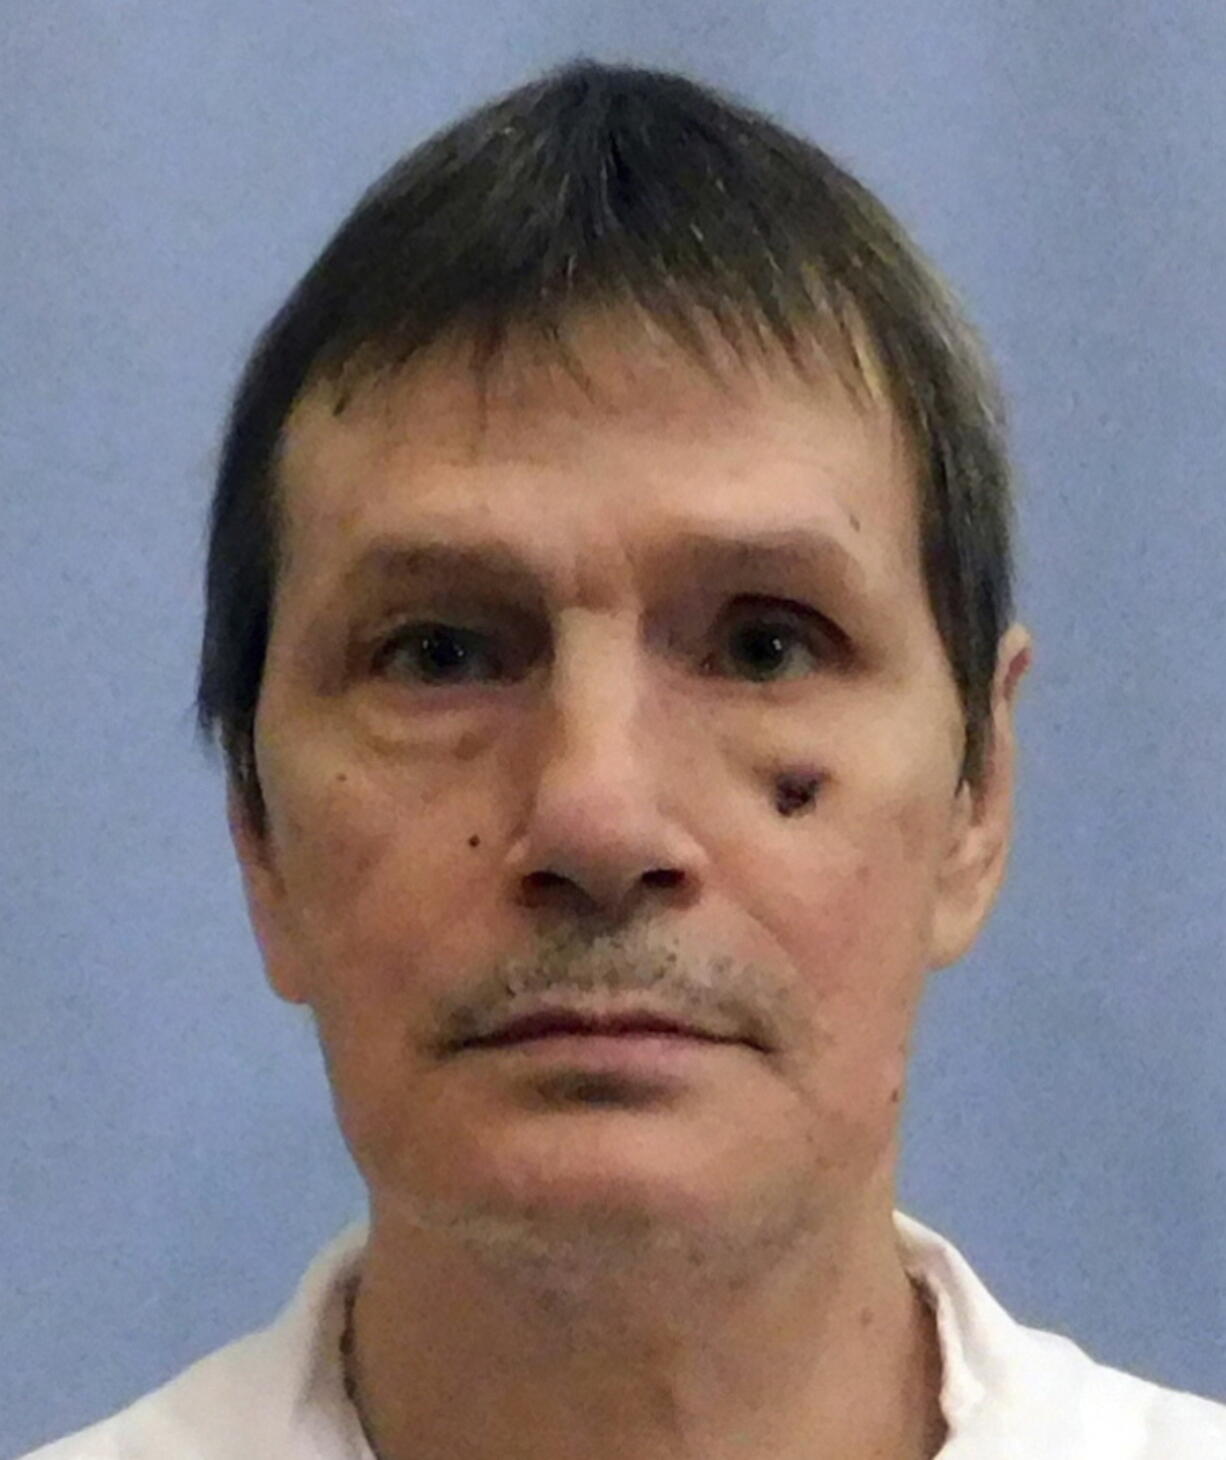 FILE - This undated photo from the Alabama Department of Corrections shows inmate Doyle Lee Hamm. The Alabama inmate whose lethal injection was halted because medical staff couldn't find a suitable vein for the execution has died of natural causes almost four years later, his lawyer said. Hamm, who was convicted in the slaying of a motel clerk in 1987, died of natural causes on death row on Sunday, Nov. 29, 2021 longtime attorney Bernard Harcourt said in an blog post. He was 64.